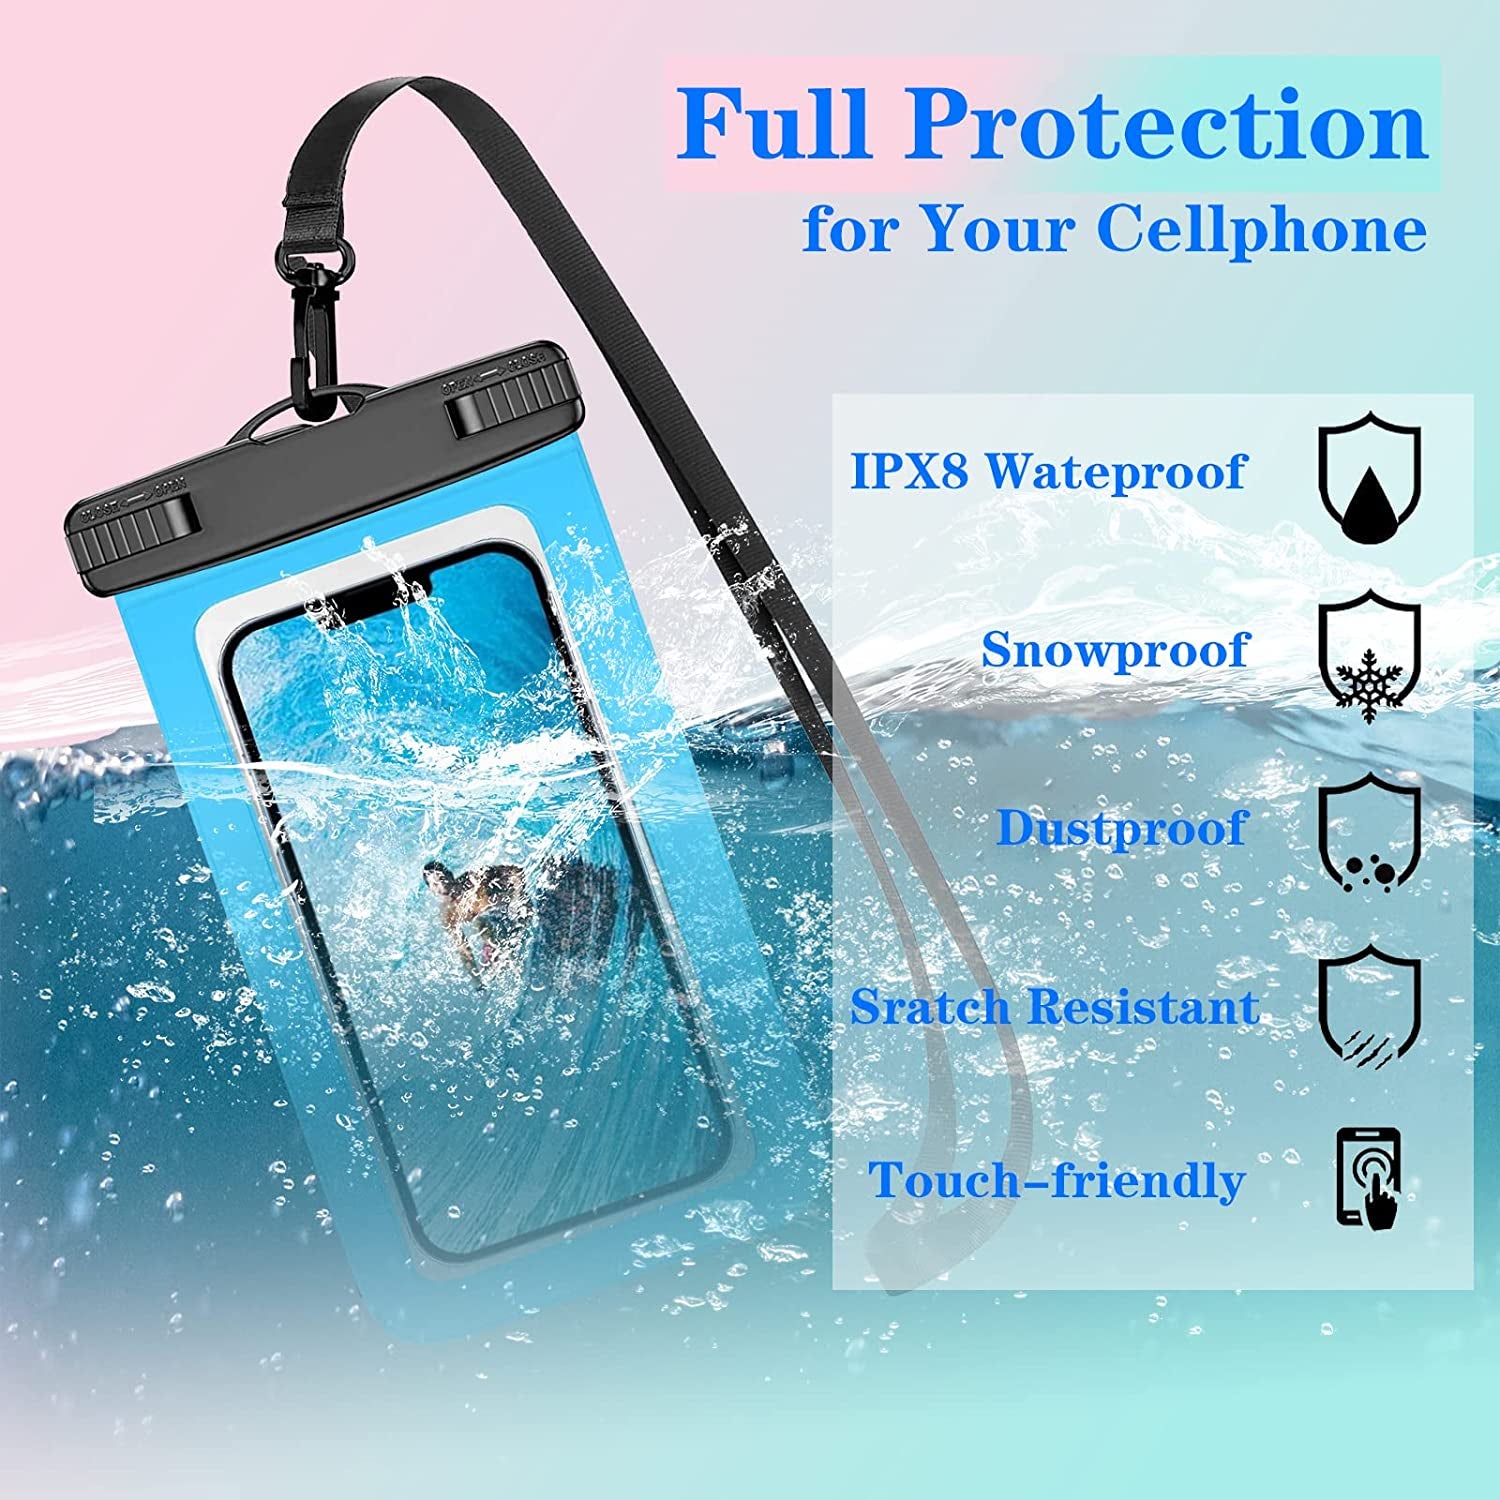 Set of 4 Multicolor Universal Waterproof Cases - Compatible with iPhone, Samsung Galaxy, Up to 7.5" - IPX8 Certified Cellphone Dry Bags